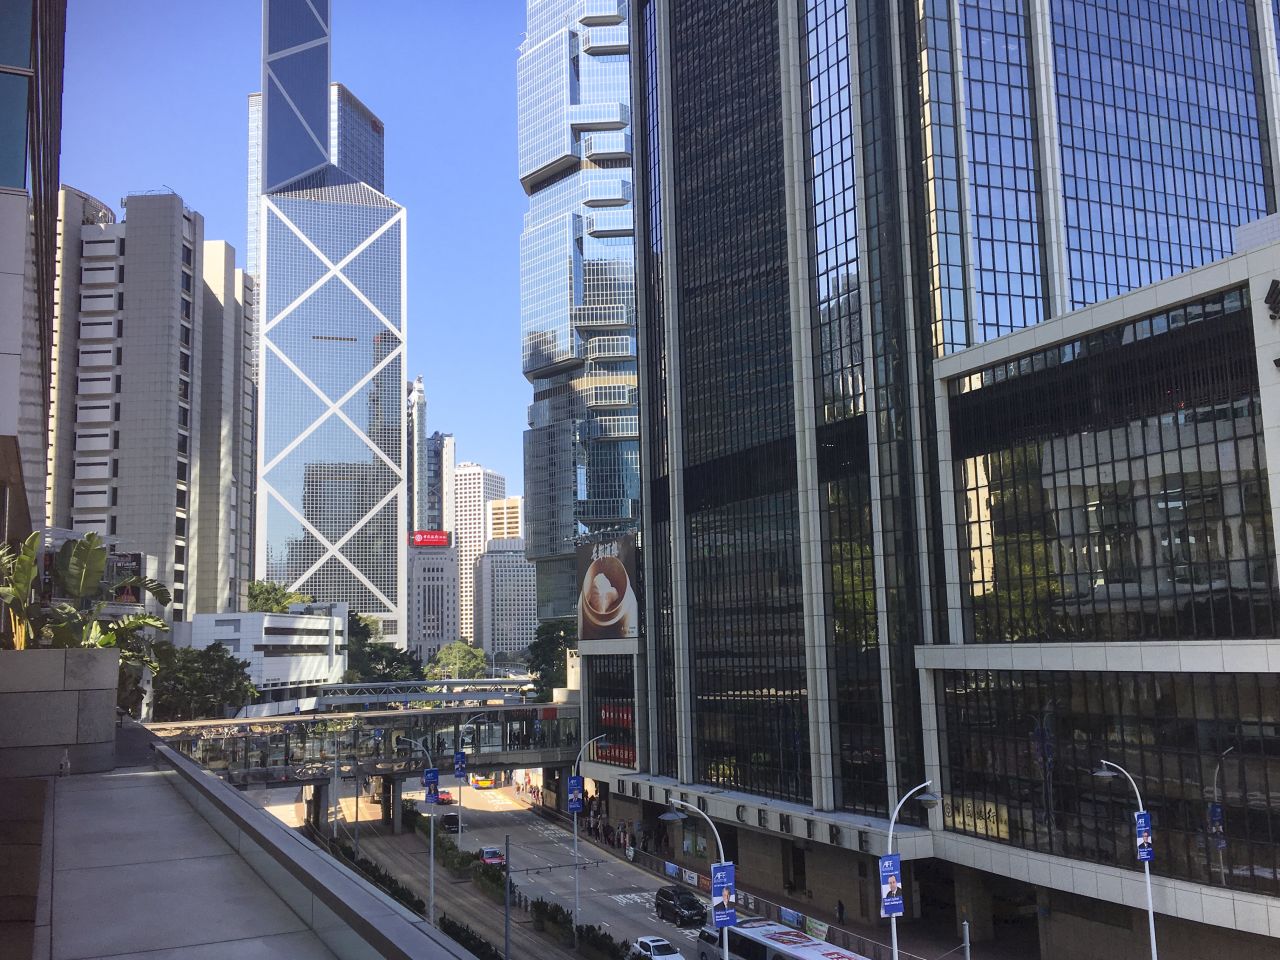 The temptation to get in a car and drive is minimized by footbridges and elevators that provide easier access to walking routes in Hong Kong.